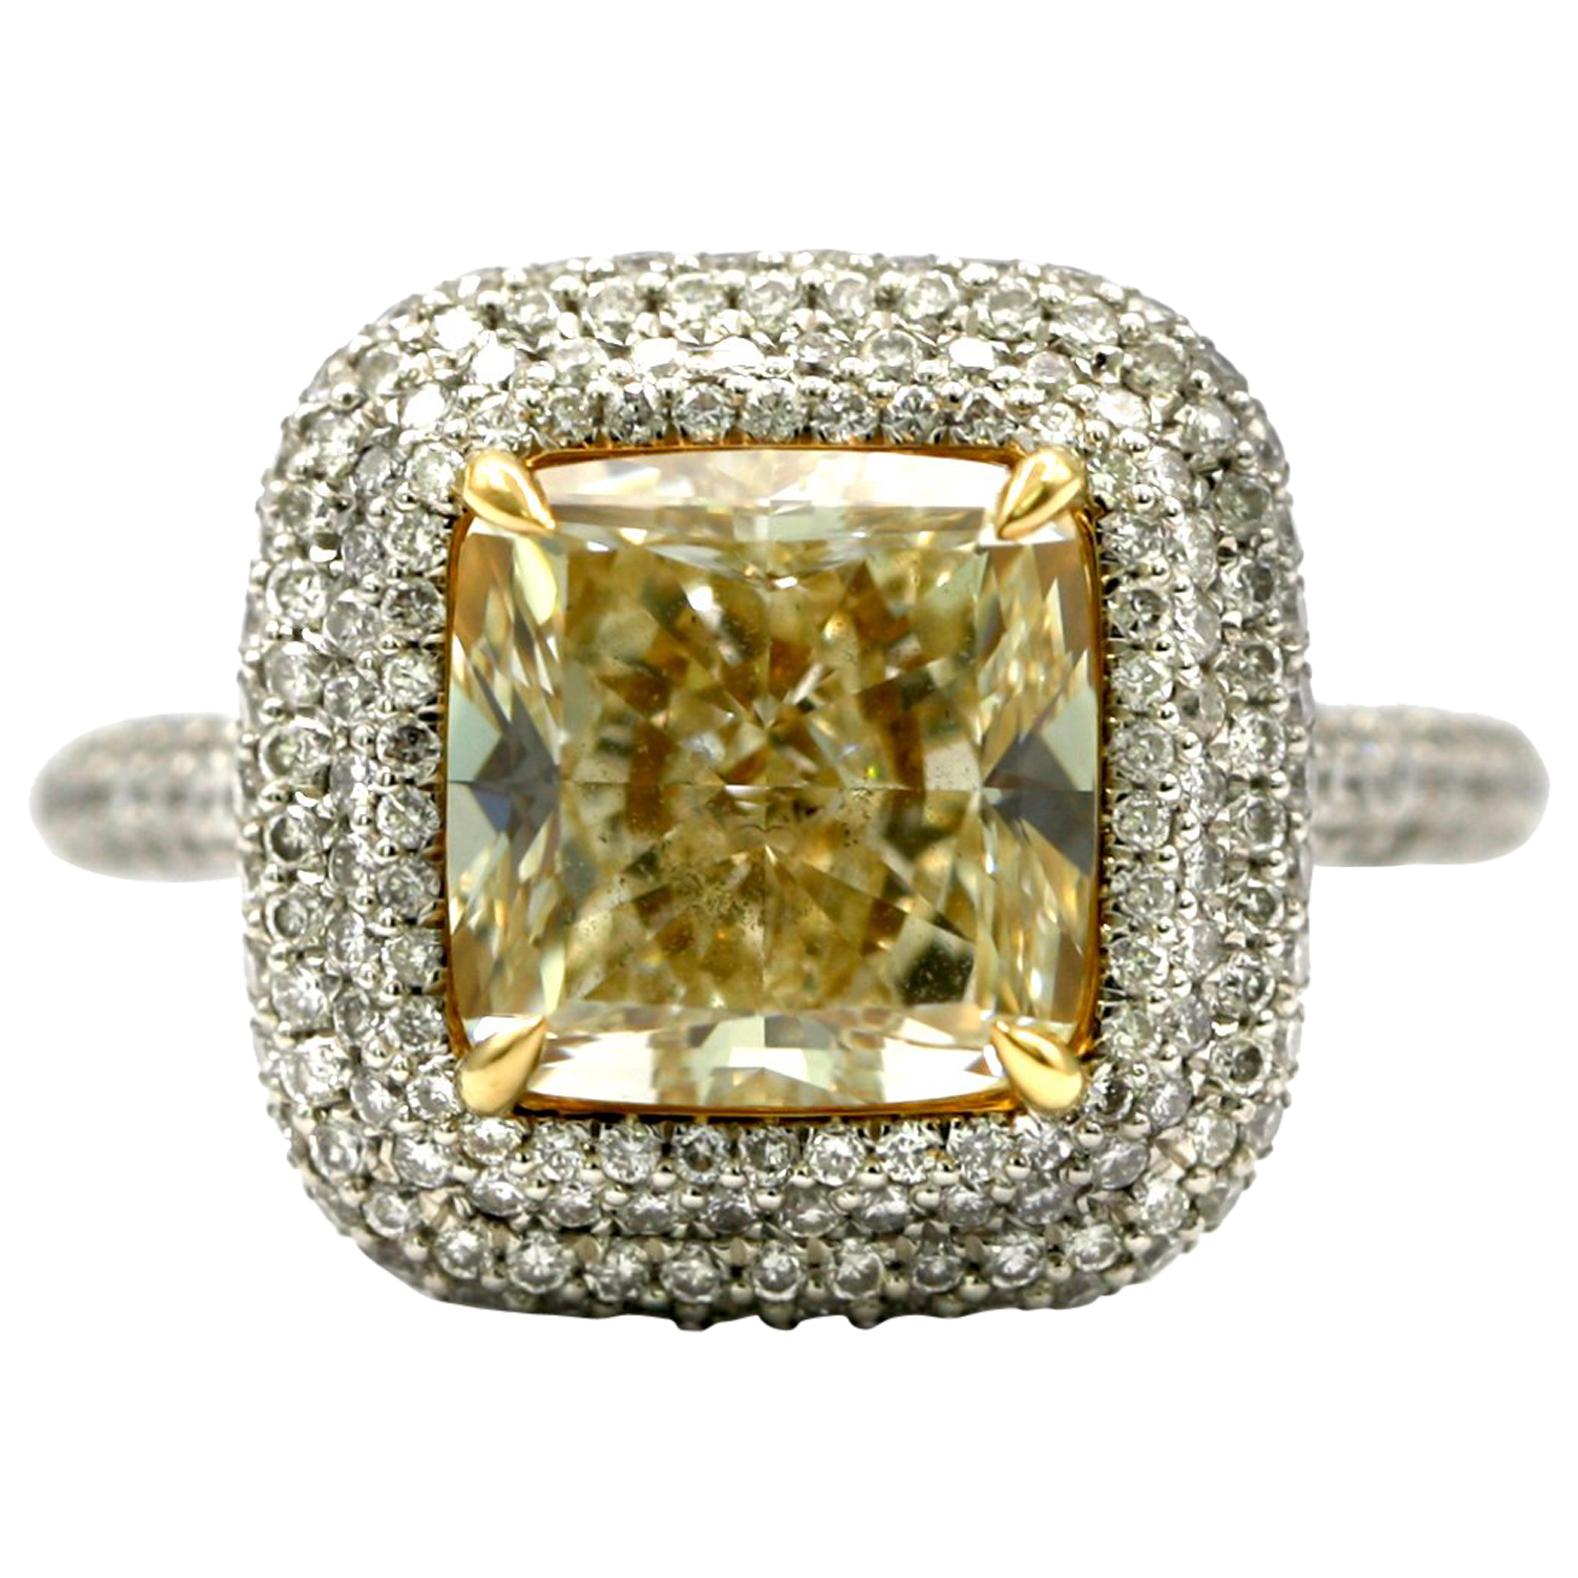 4.25 Carat EGL Fancy Light Yellow Cushion SI1 Diamond with Pave Platinum Ring For Sale